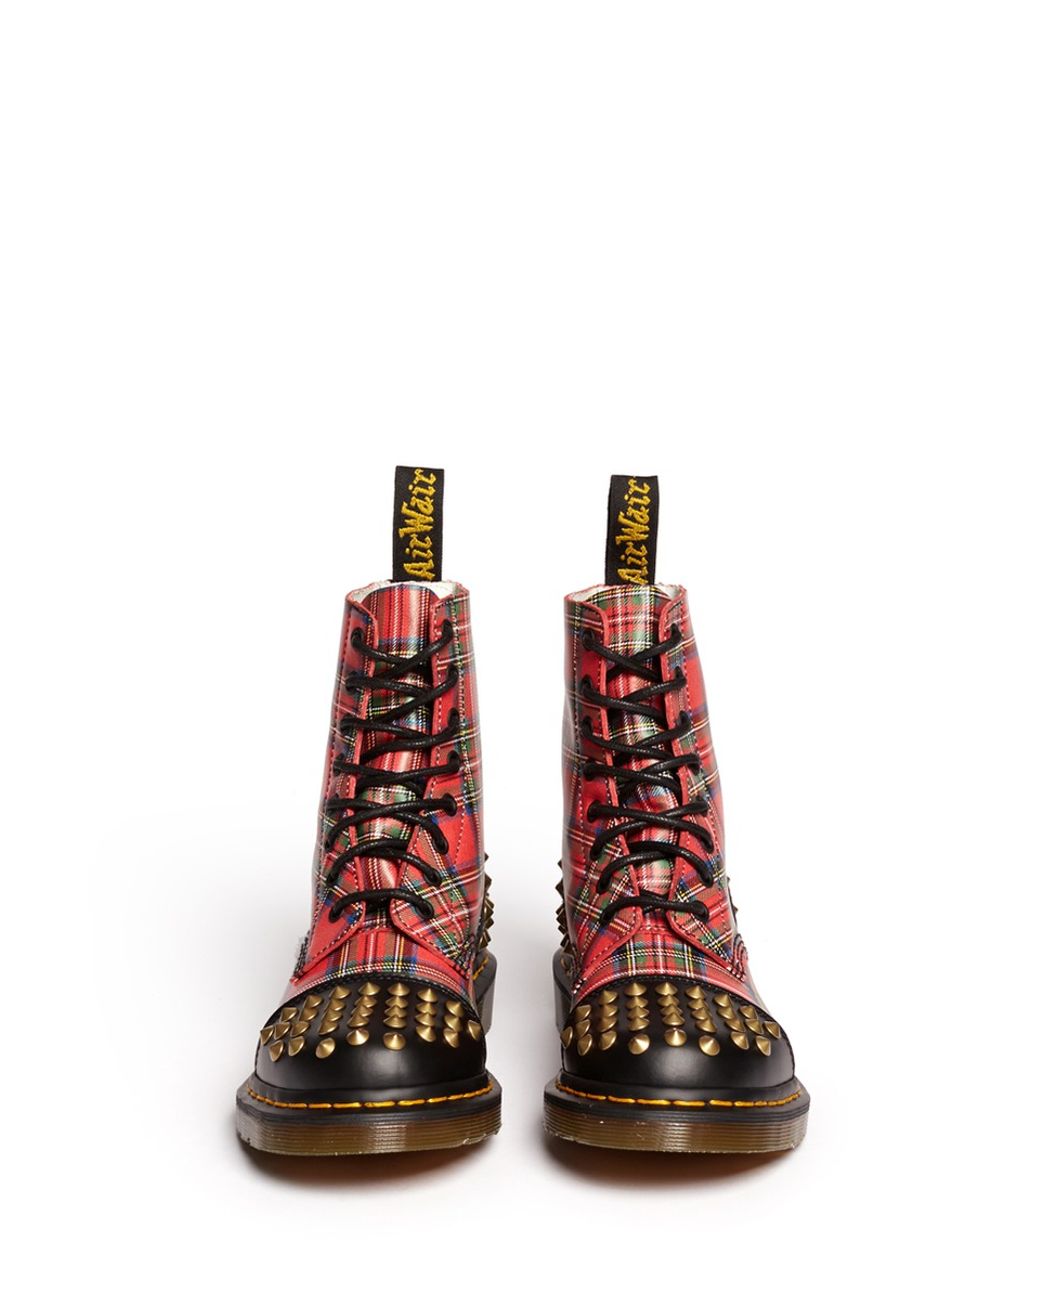 Dr. Martens 'dai' Studded Tartan Boots in Red | Lyst